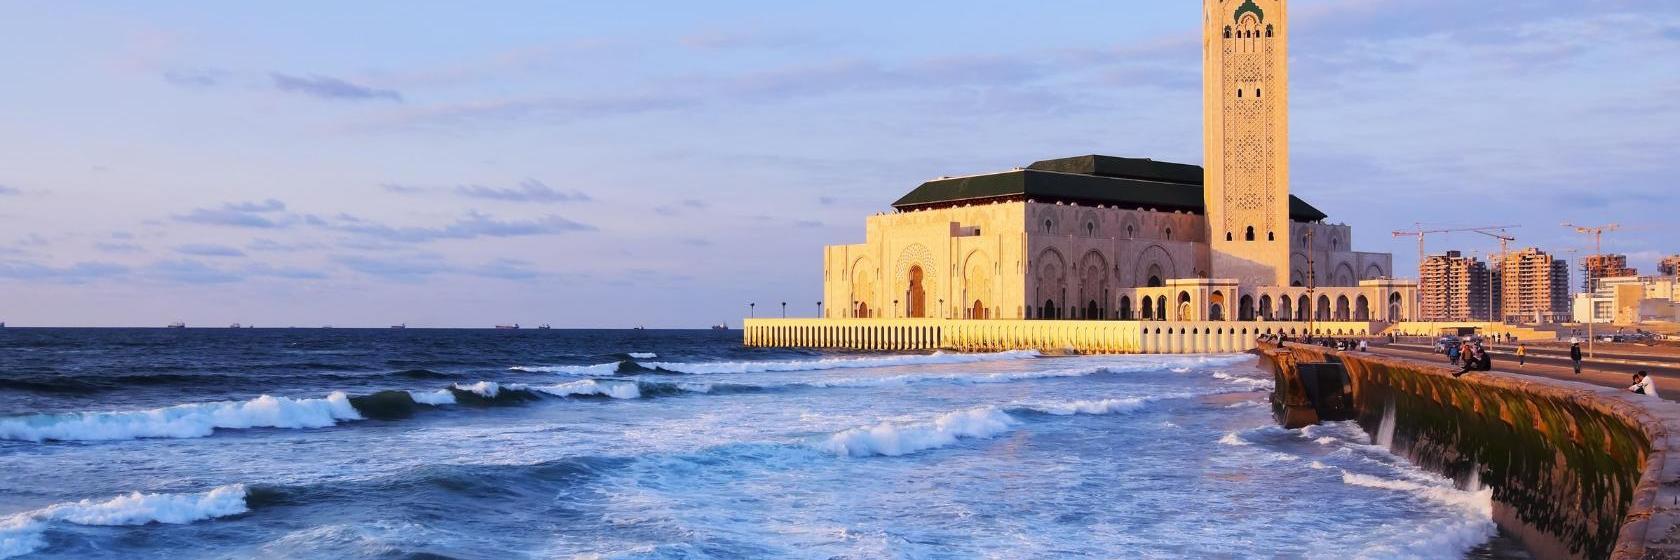 The 10 best hotels & places to stay in Casablanca, Morocco - Casablanca